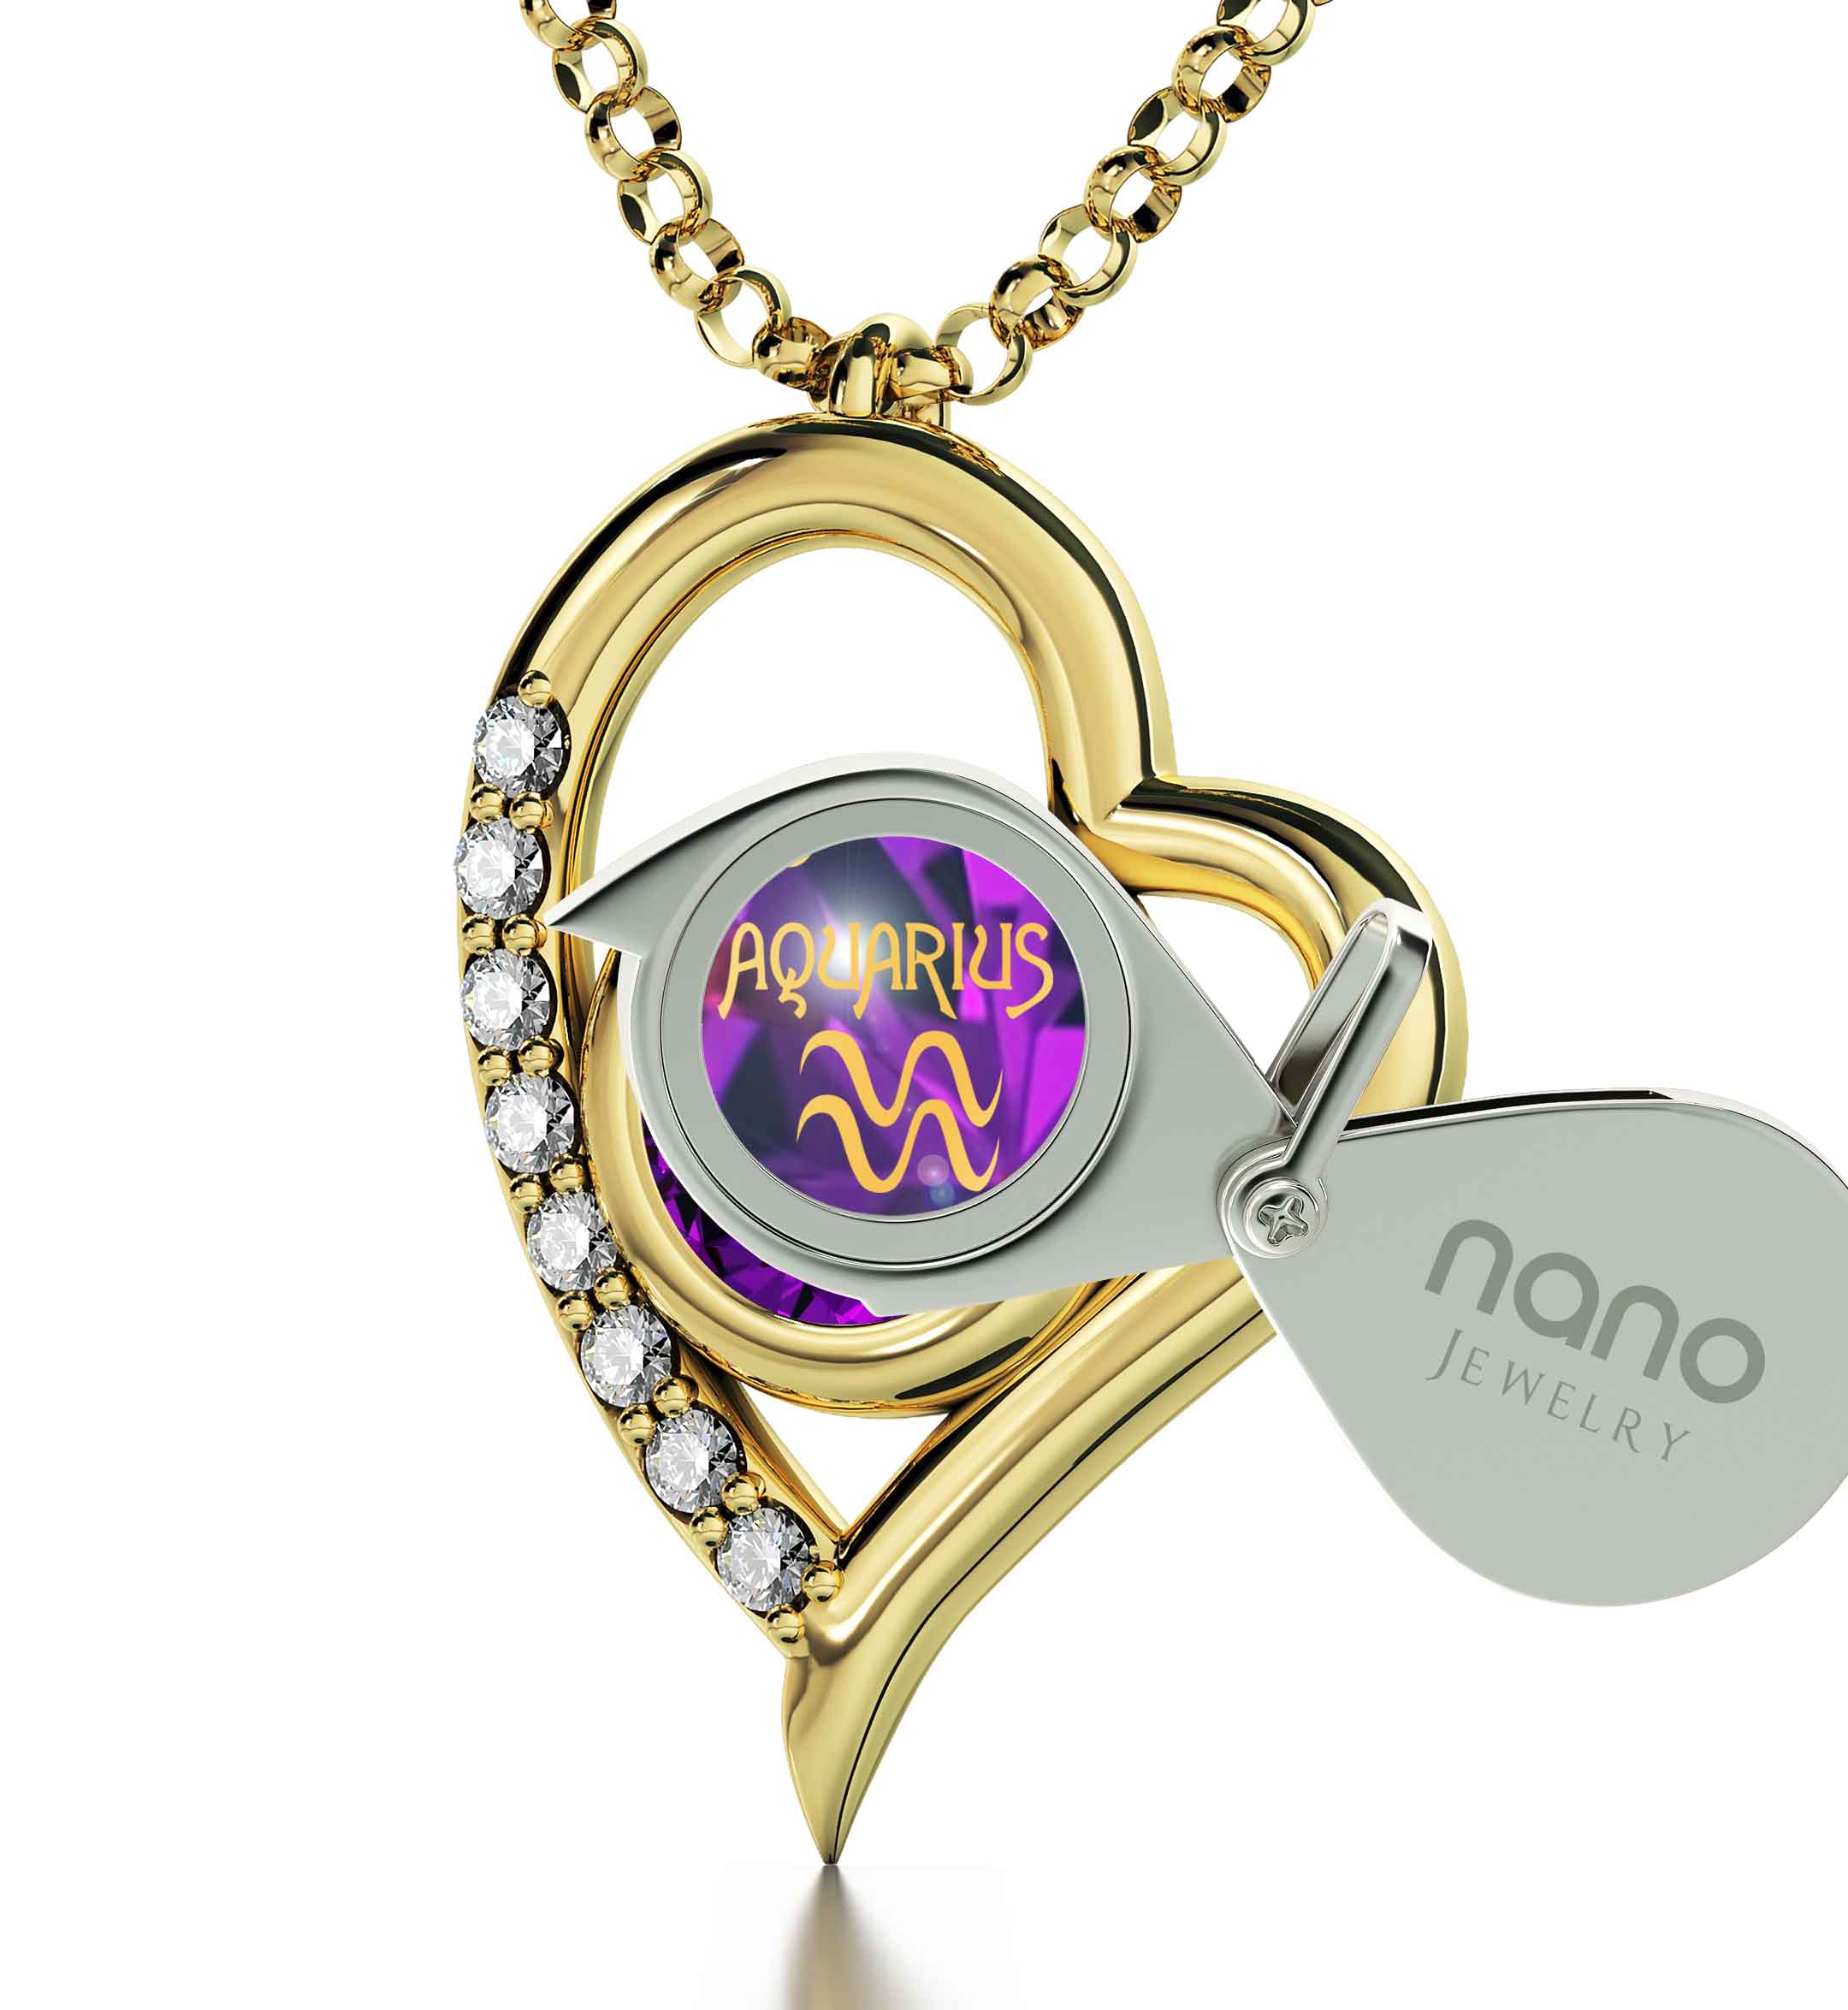 Gold Plated Silver Zodiac Heart Pendant Aquarius Necklace with a Swarovski crystal featuring the Aquarius zodiac symbol, framed by a circular golden design.